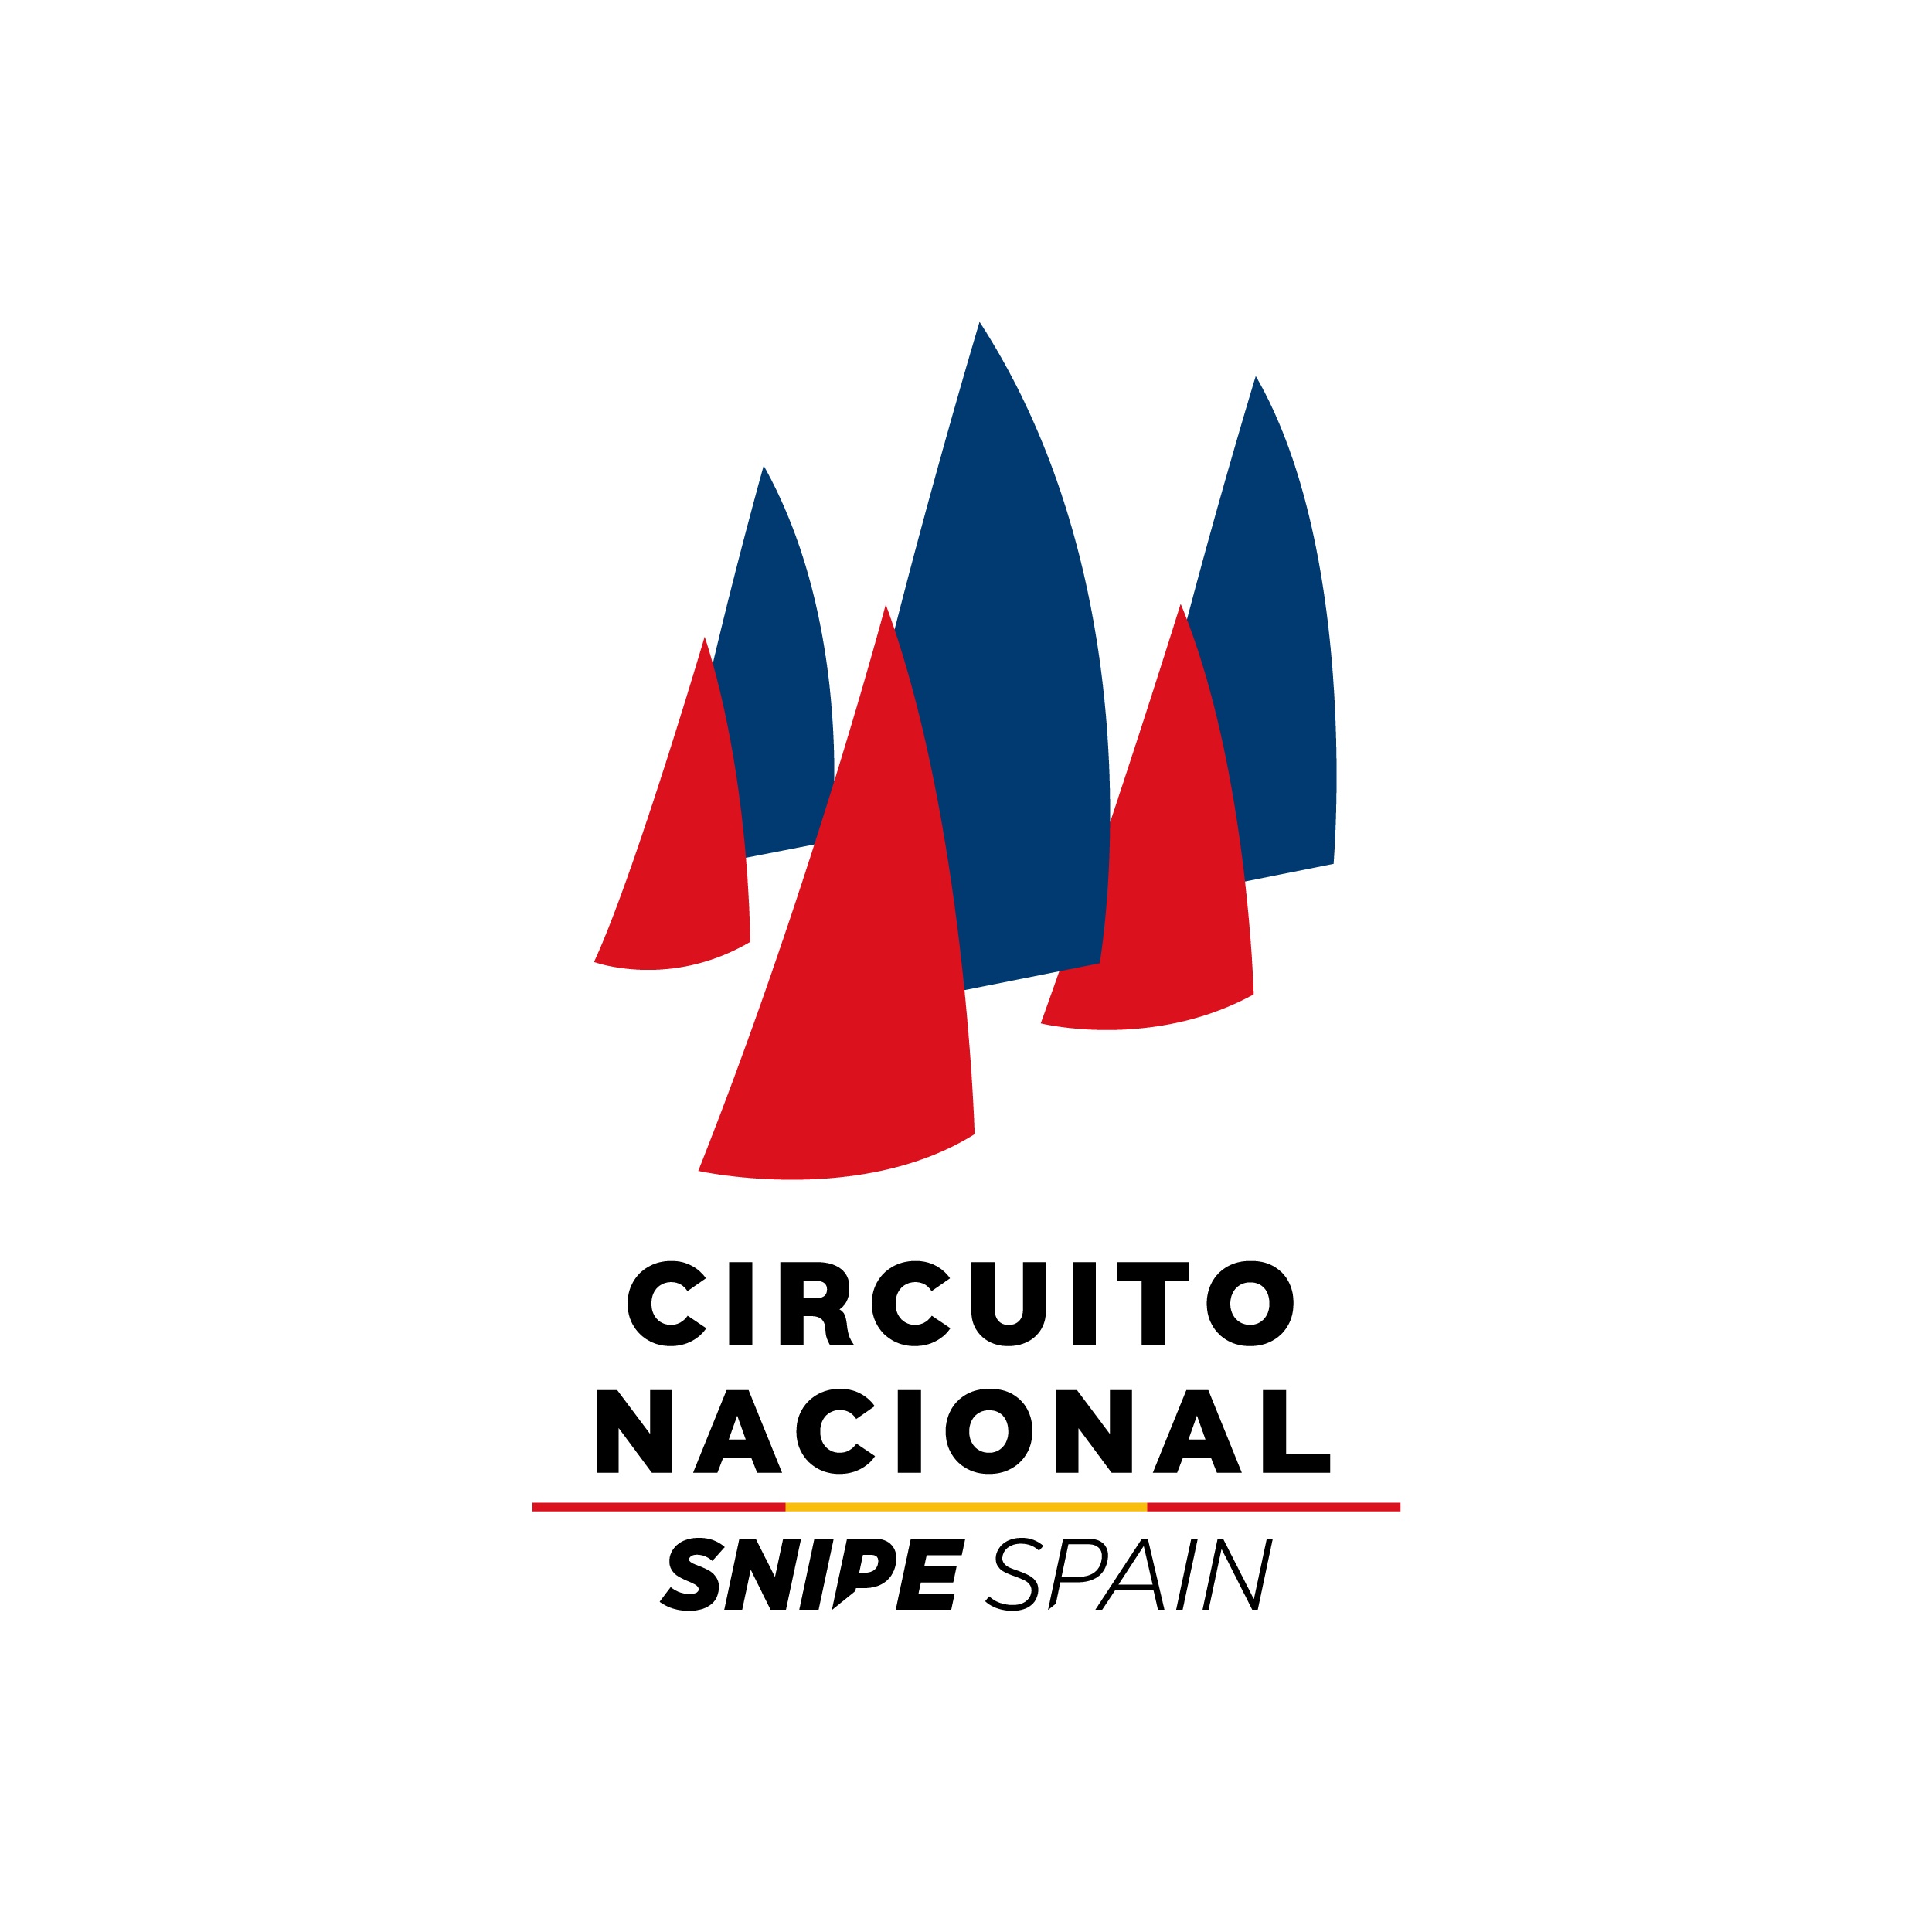 National and Regional Circuits in Spain Image